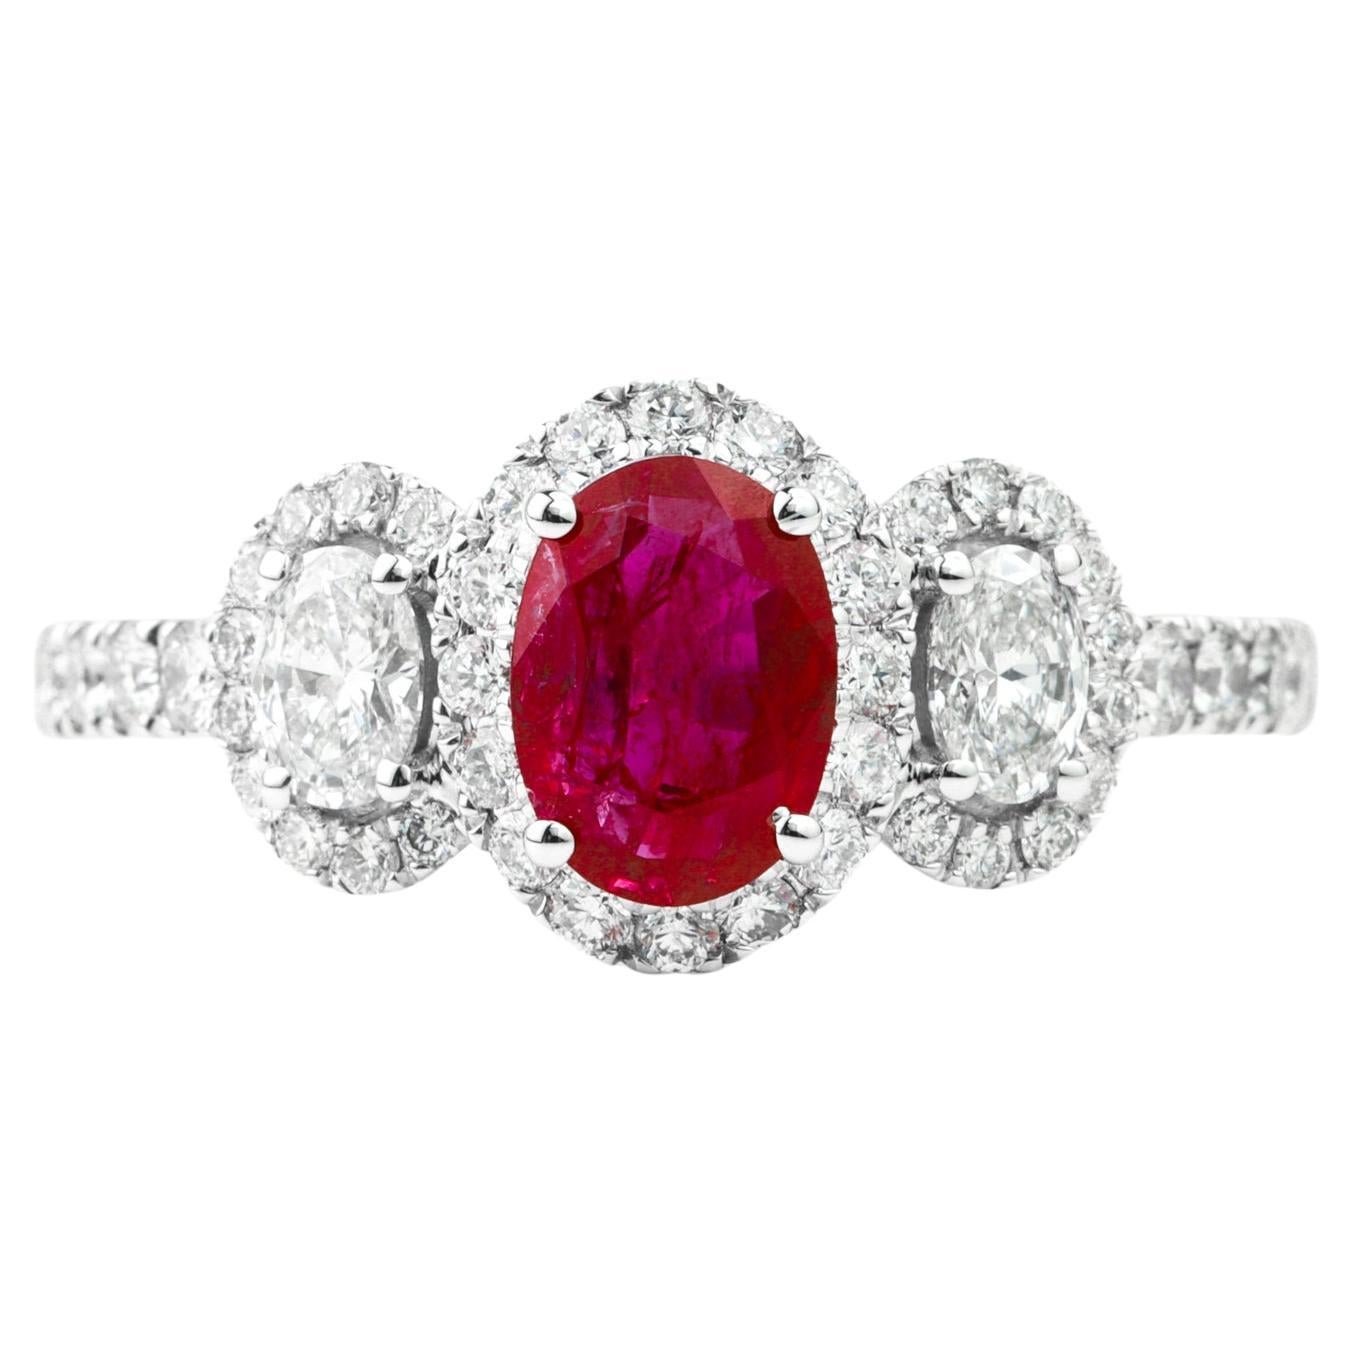 Oval Cut Red Ruby Diamond Three Stone Halo Engagement Ring in 18k White Gold